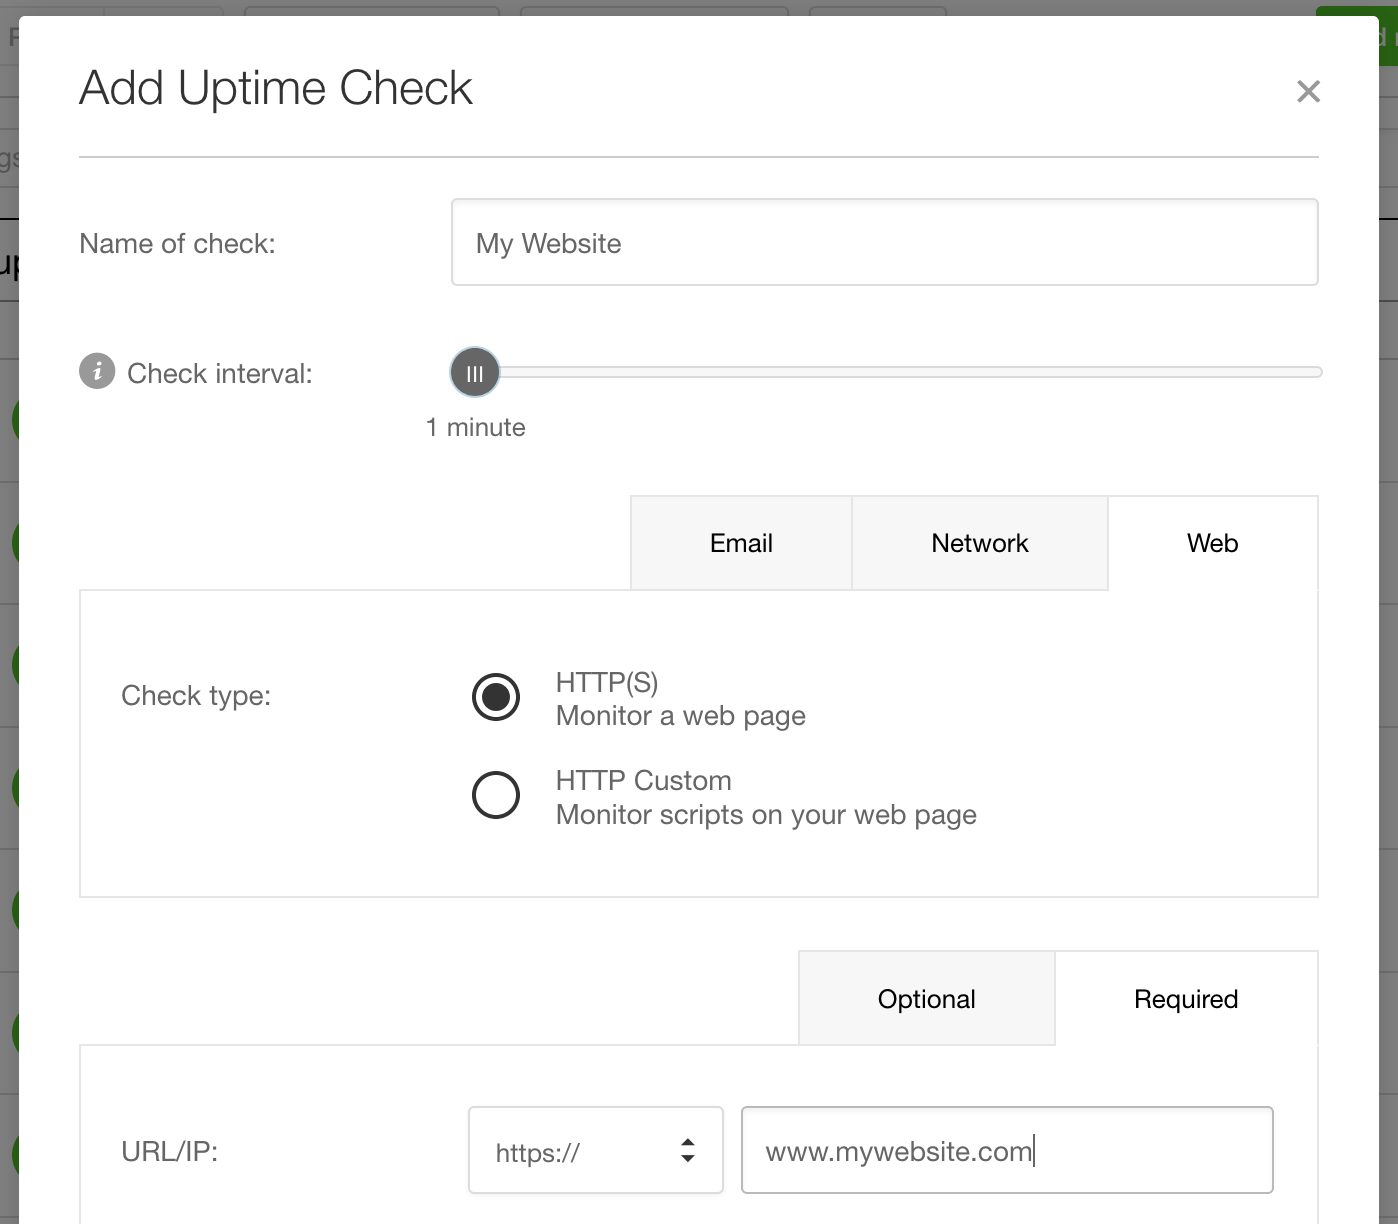 Add uptime check form 1